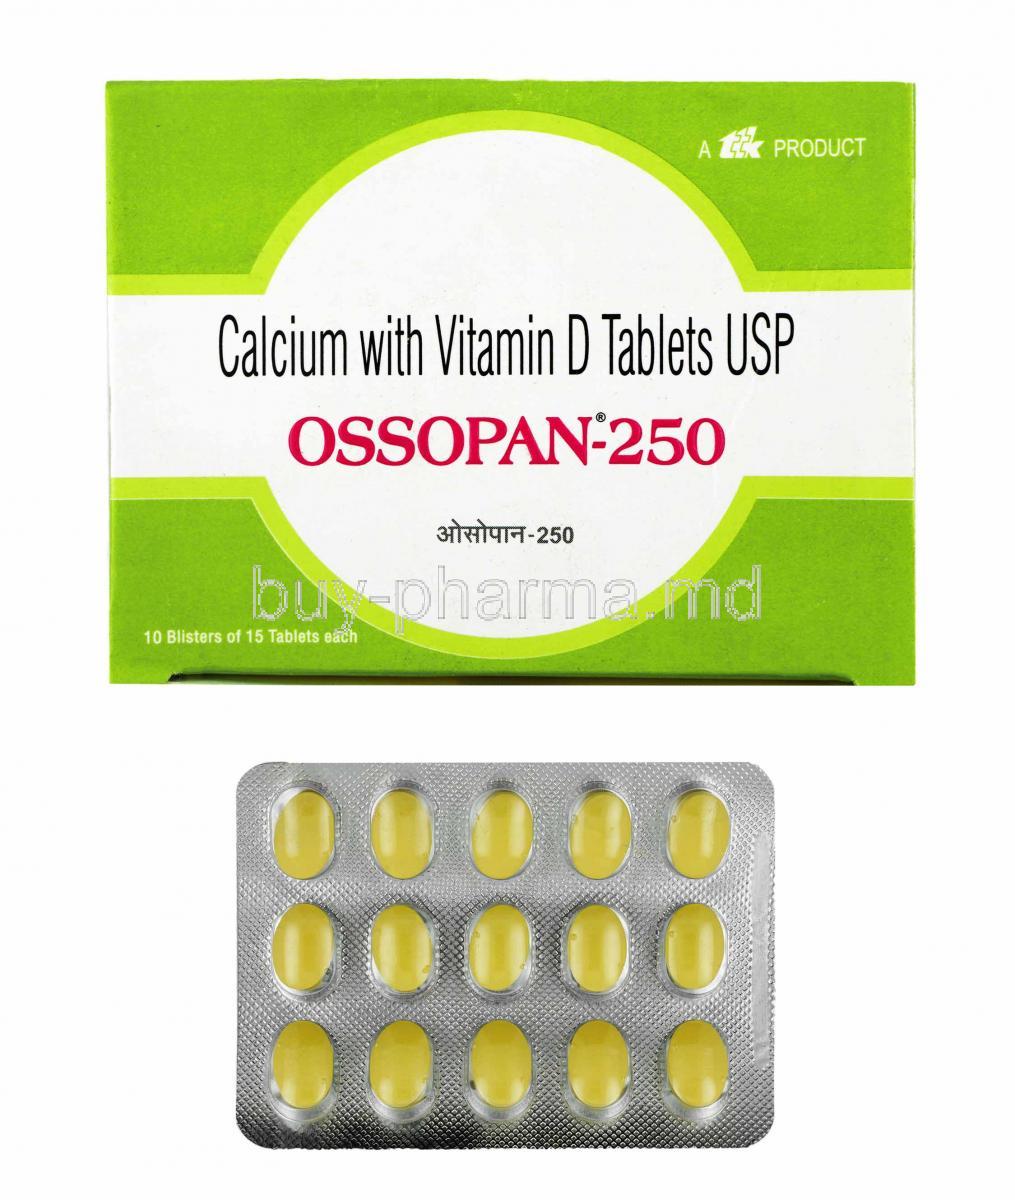 Ossopan, Calcium Carbonate and Vitamin D3 box and tablets